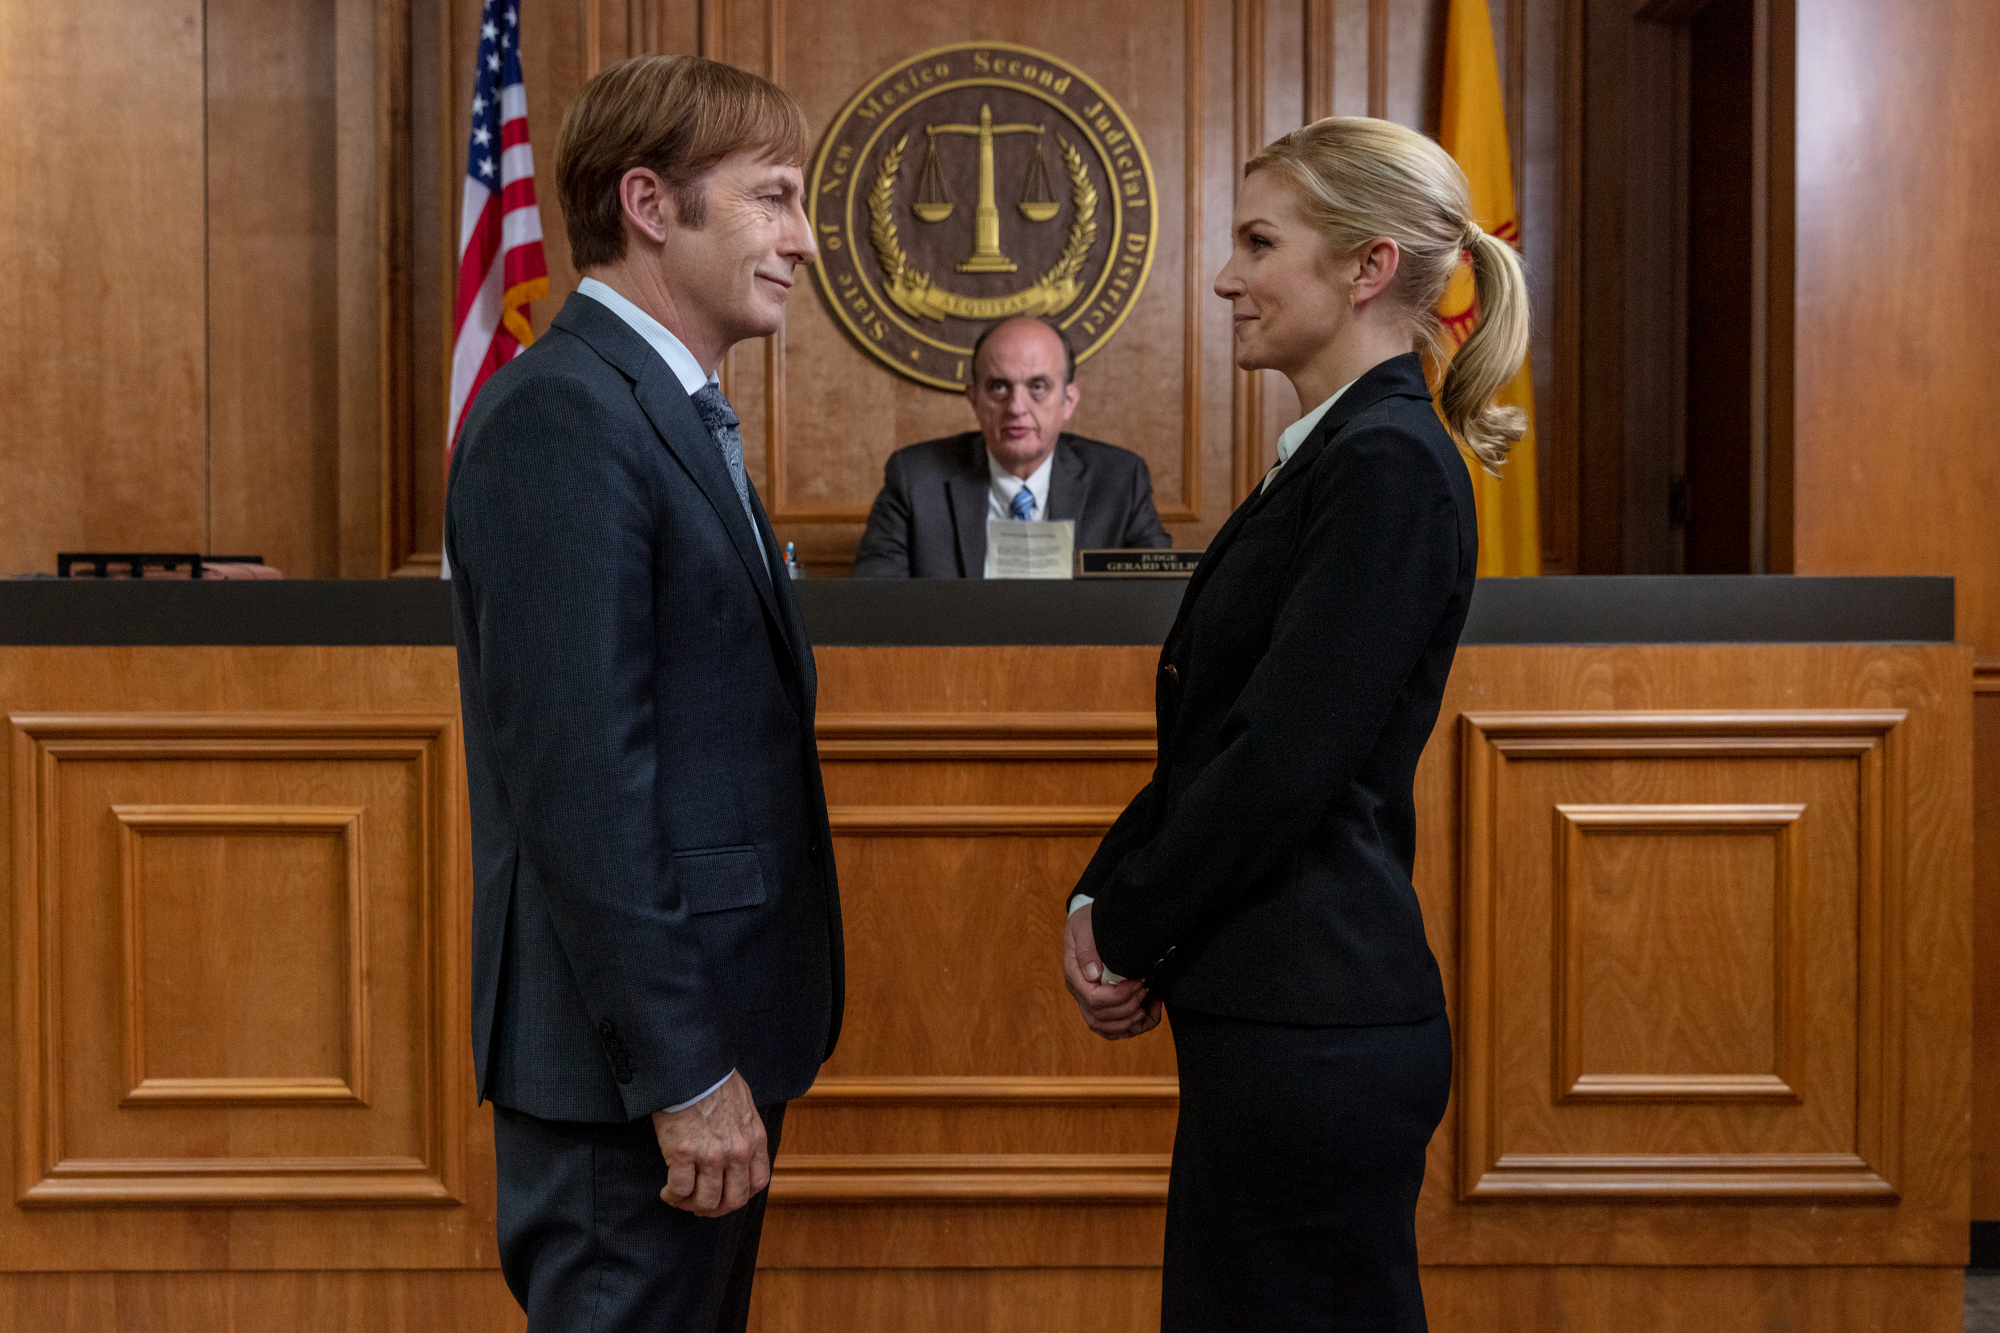 Better Call Saul Bob Odenkirk Admits Kim Wexler Could Go Off The Rails